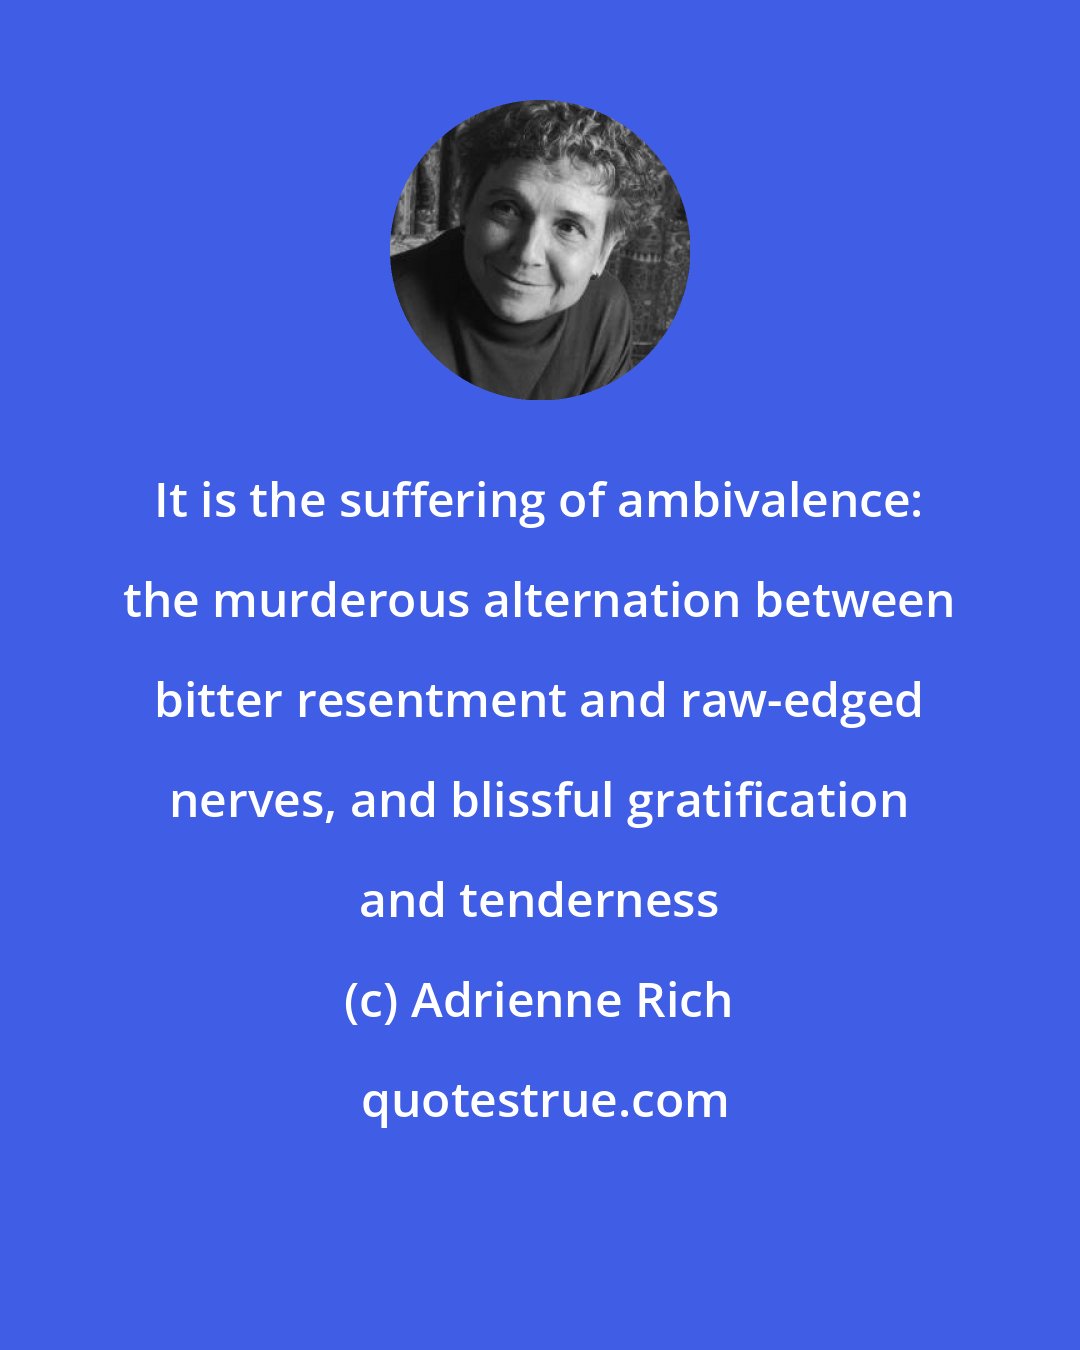 Adrienne Rich: It is the suffering of ambivalence: the murderous alternation between bitter resentment and raw-edged nerves, and blissful gratification and tenderness